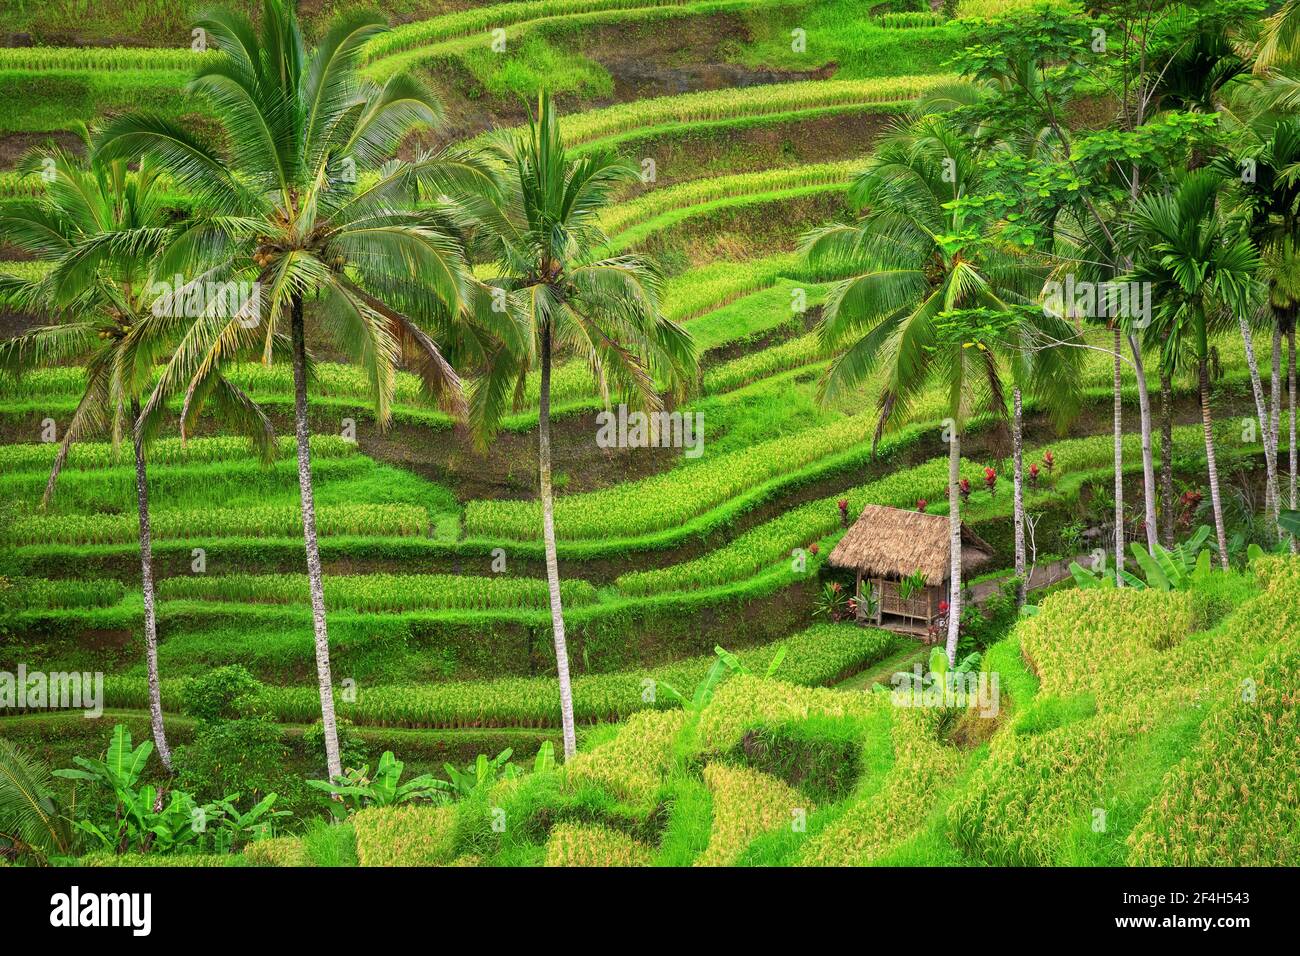 Green rice fields Tegalalang on Bali island, Indonesia Stock Photo